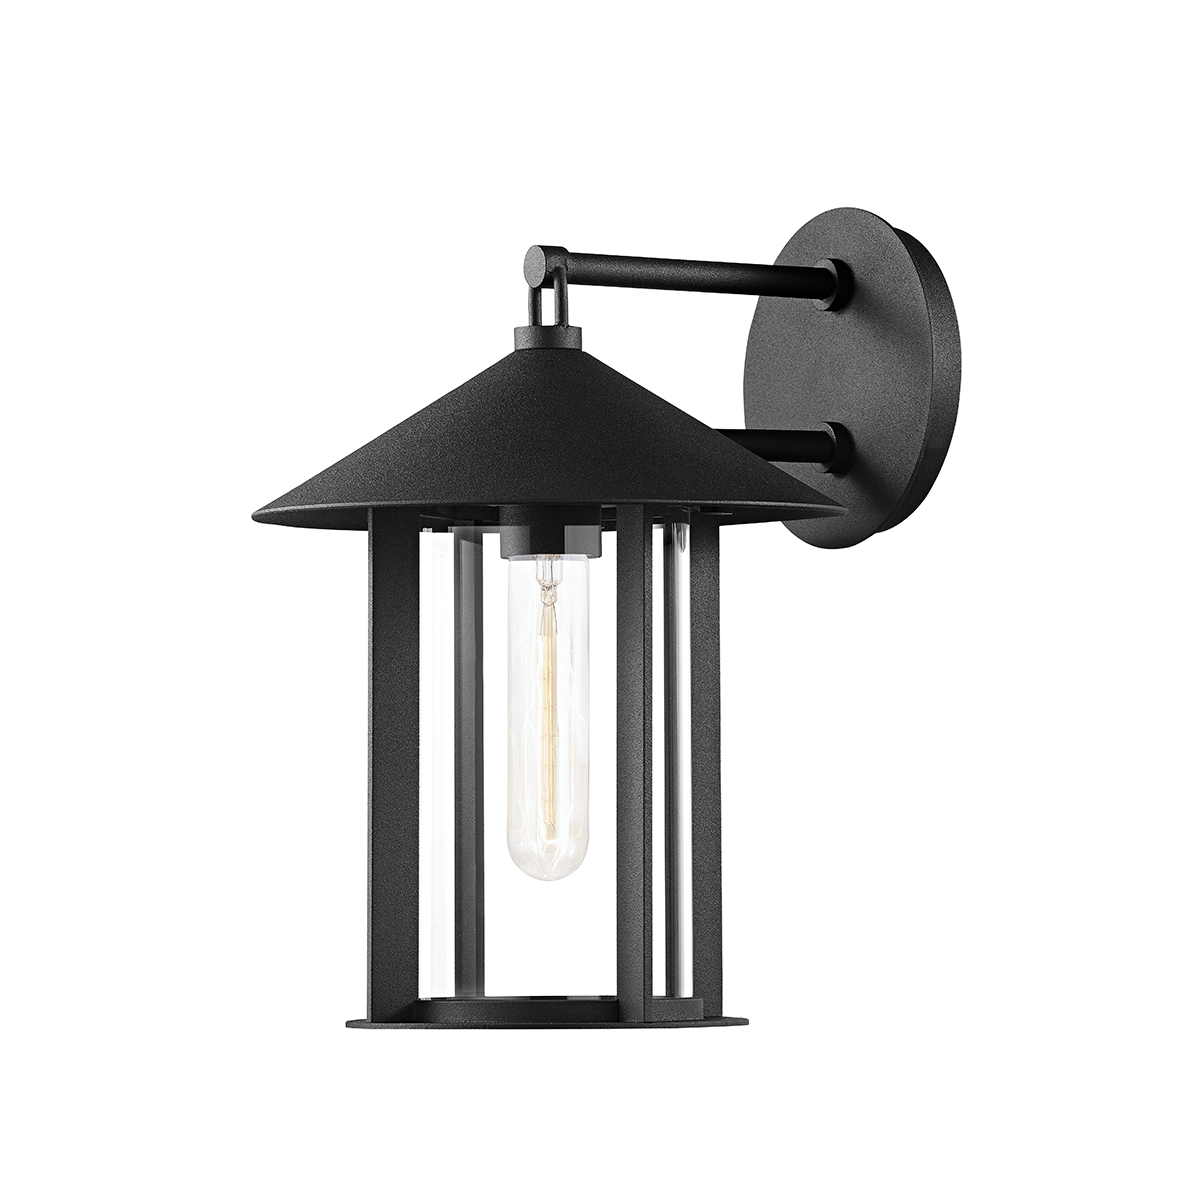 Troy LONG BEACH 1 LIGHT EXTERIOR WALL SCONCE B1951 Outdoor l Wall Troy Lighting   